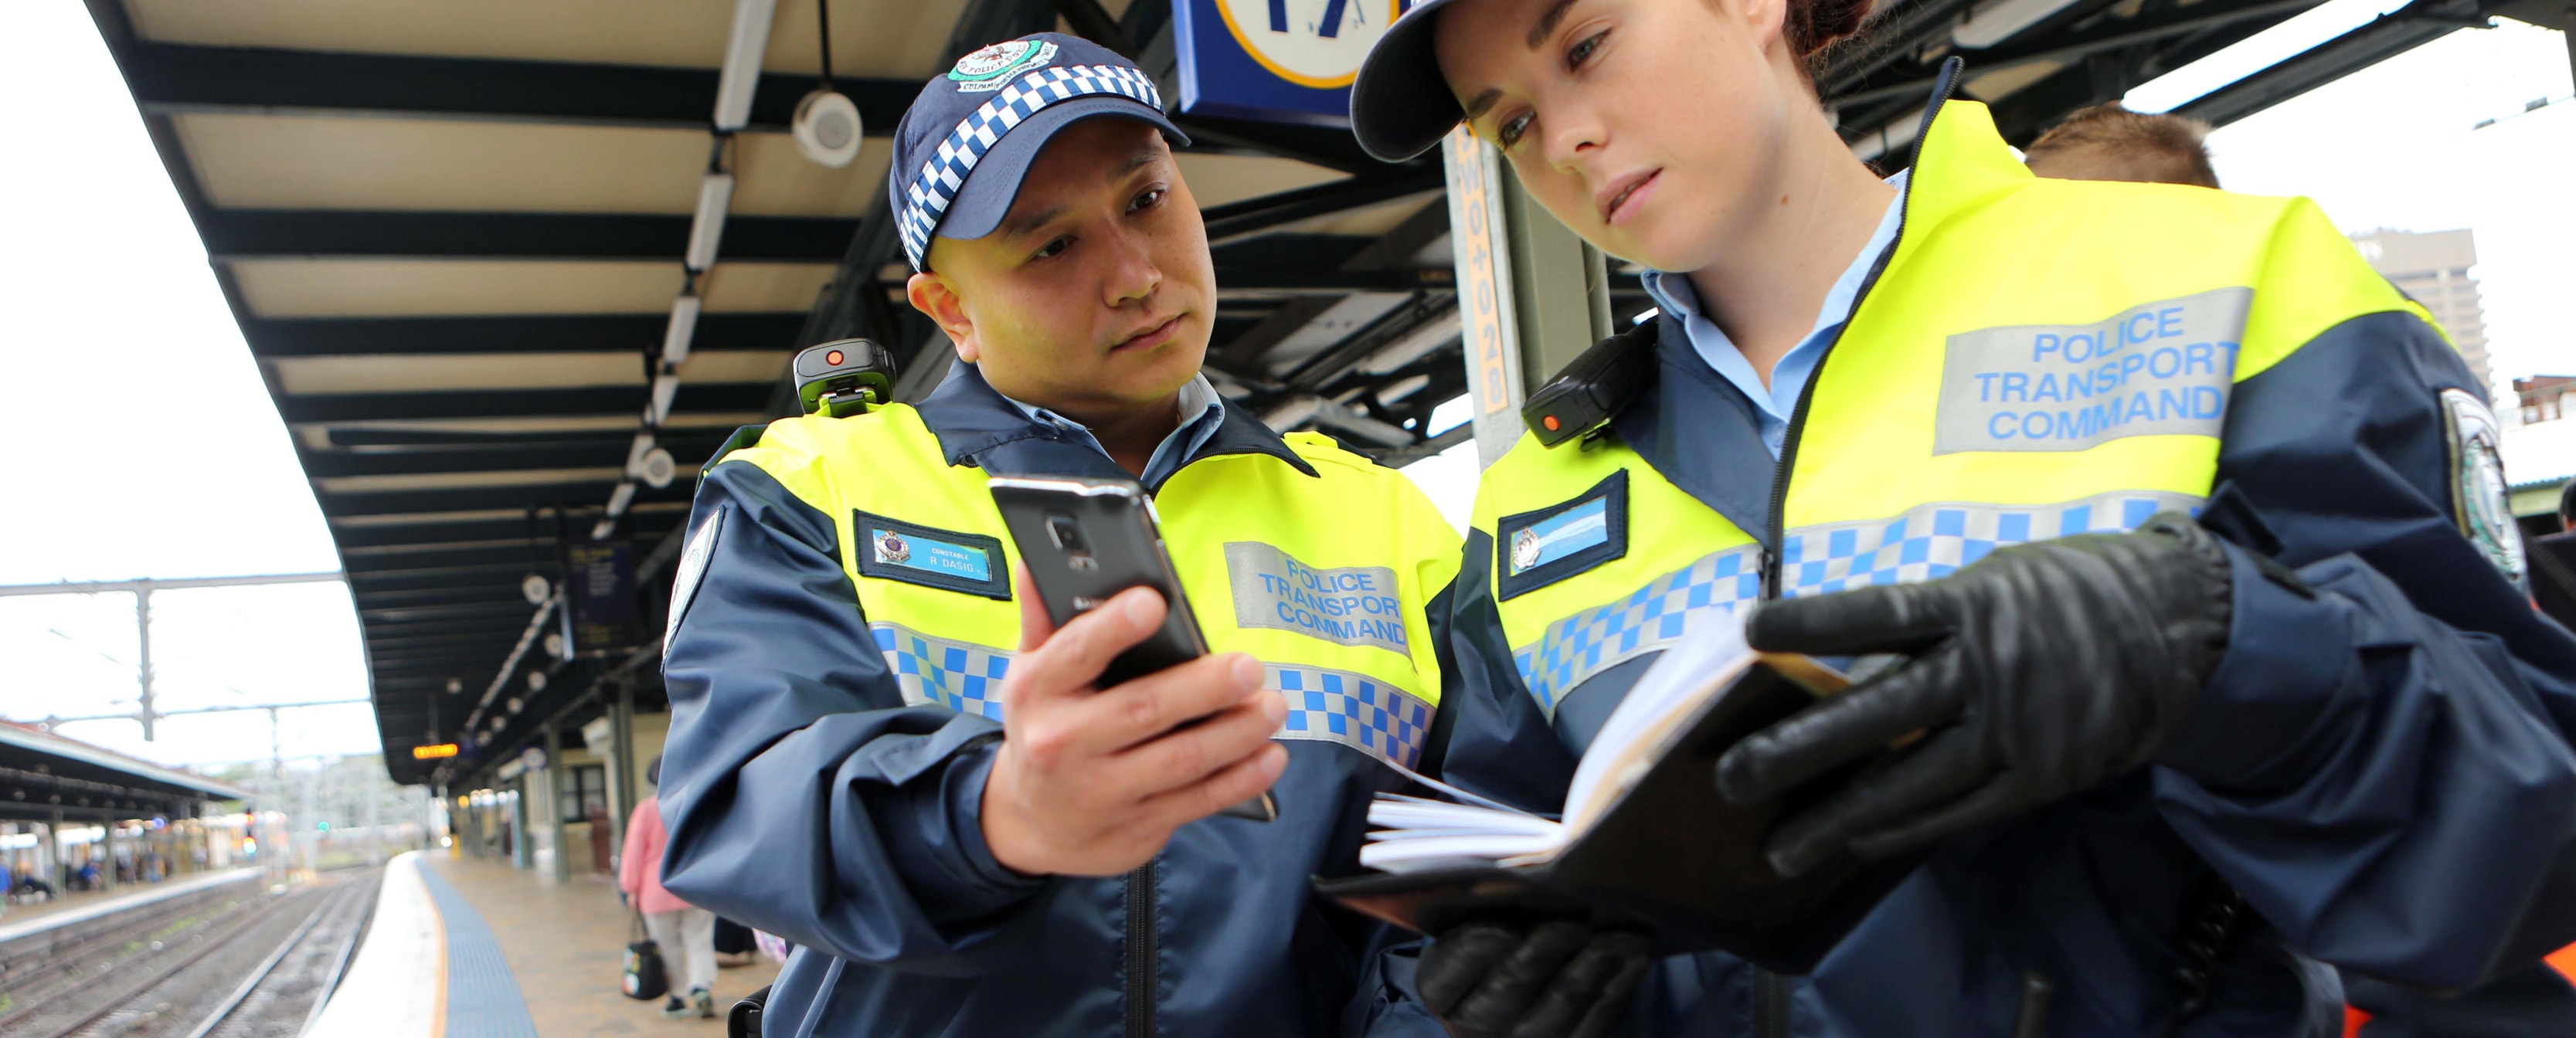 body cameras worn by transport officers australia